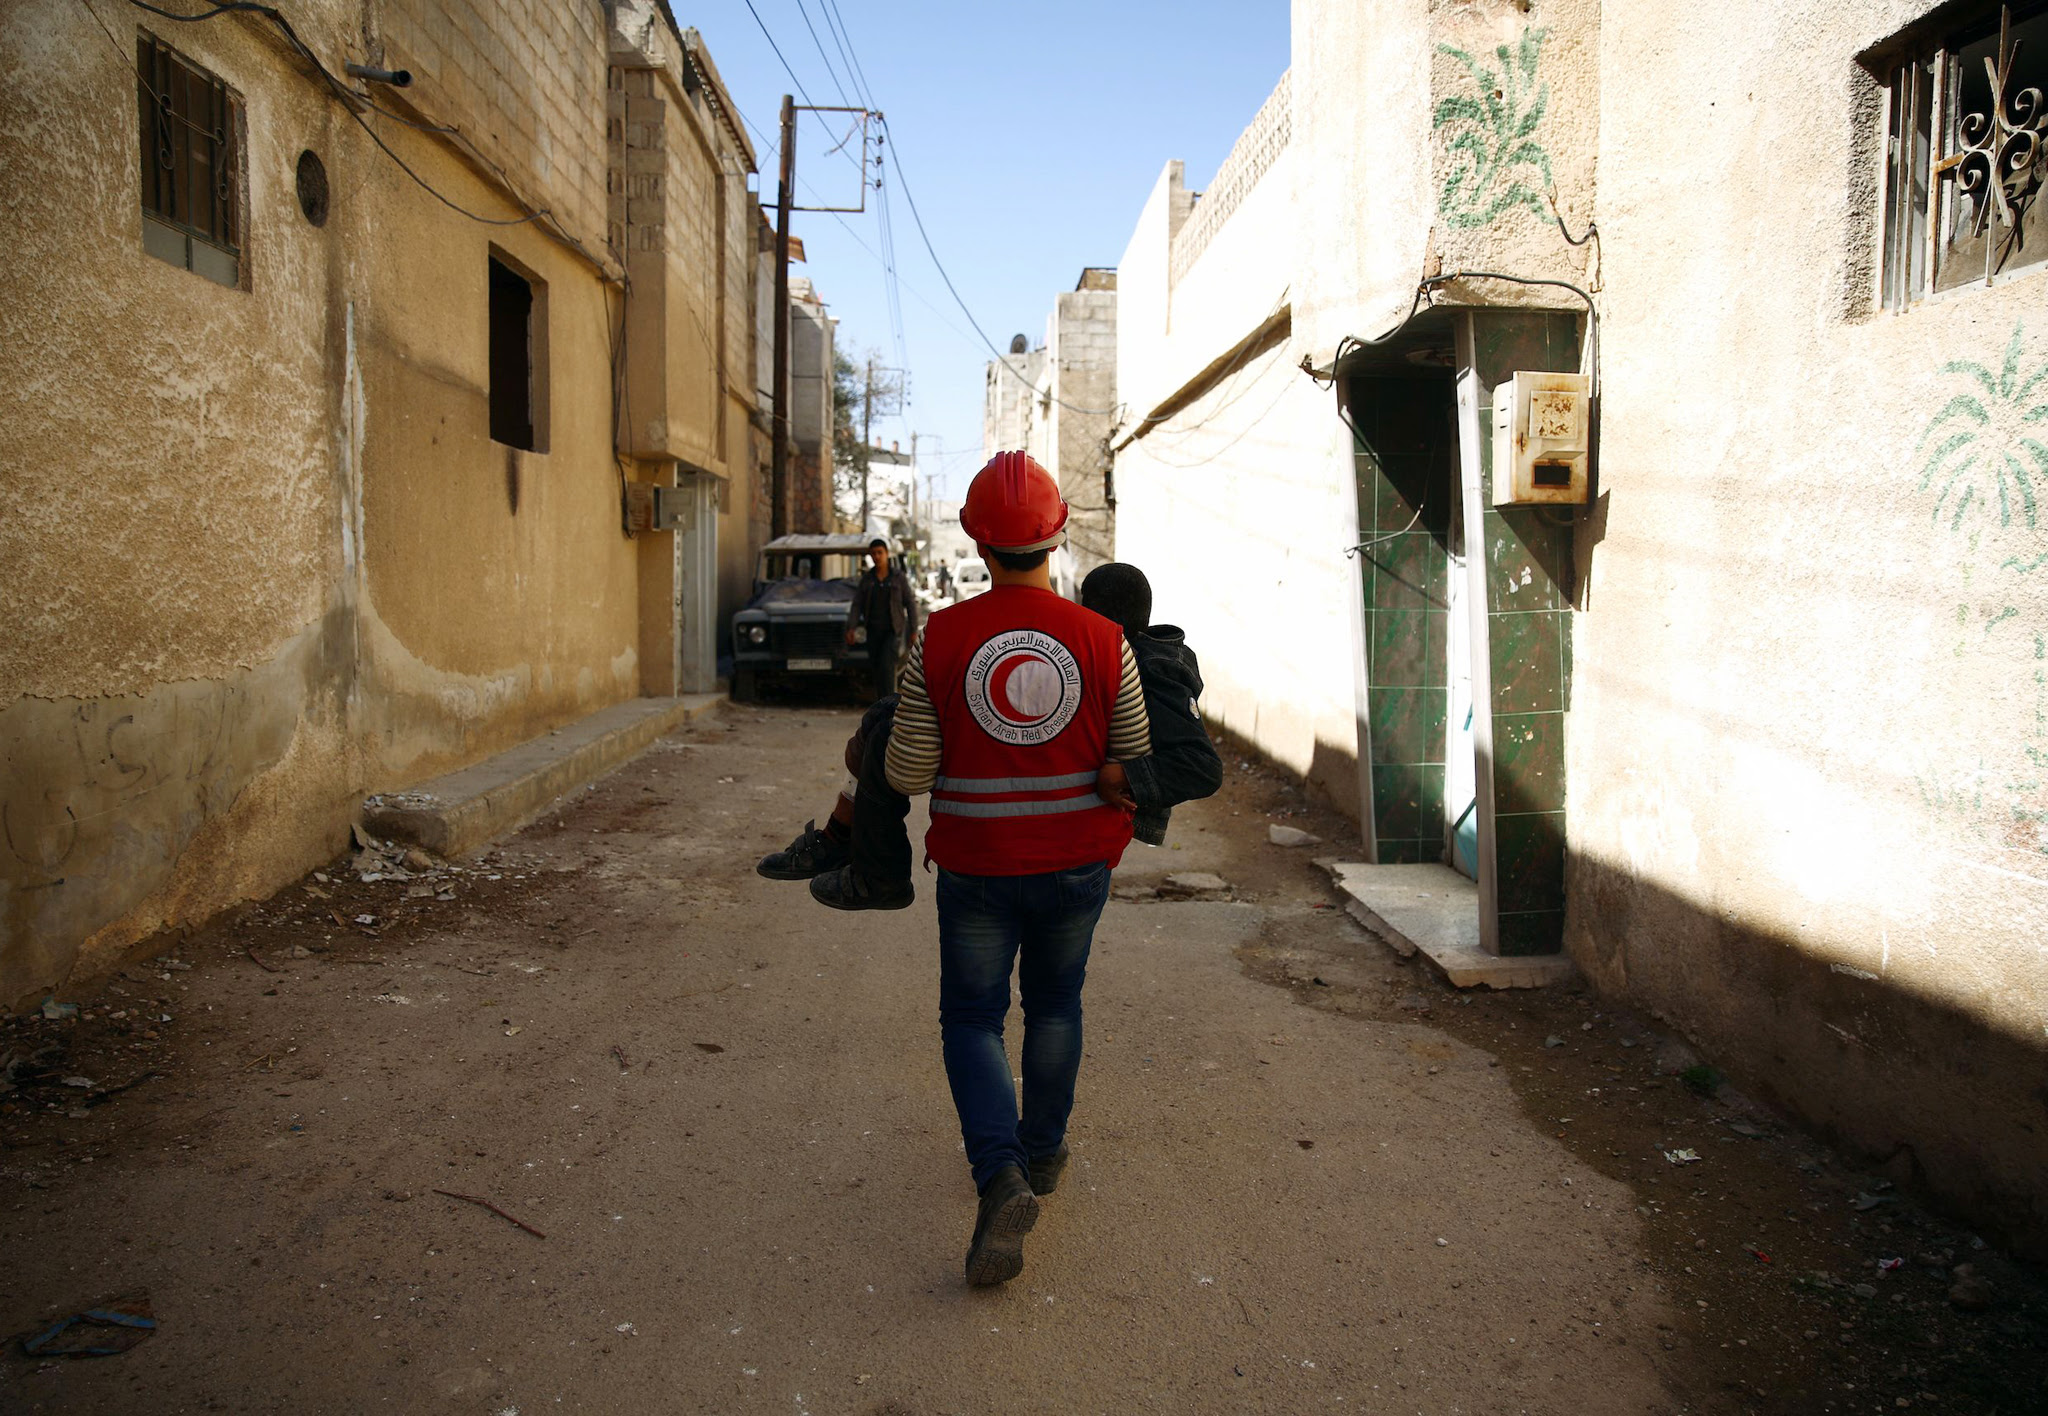 A member of the Syrian Arab Red Crescent...A member of the Syrian Arab Red Crescent carries a wounded boy following an airstrike in the rebel-held city of Douma in Eastern Ghouta, on February 26, 2016. Intense Russian air strikes and regime shelling battered rebel bastions across Syria, the Syrian Observatory for Human Rights said, just hours before a midnight deadline for a landmark ceasefire in the country's five-year civil war. / AFP / Abd DoumanyABD DOUMANY/AFP/Getty Images